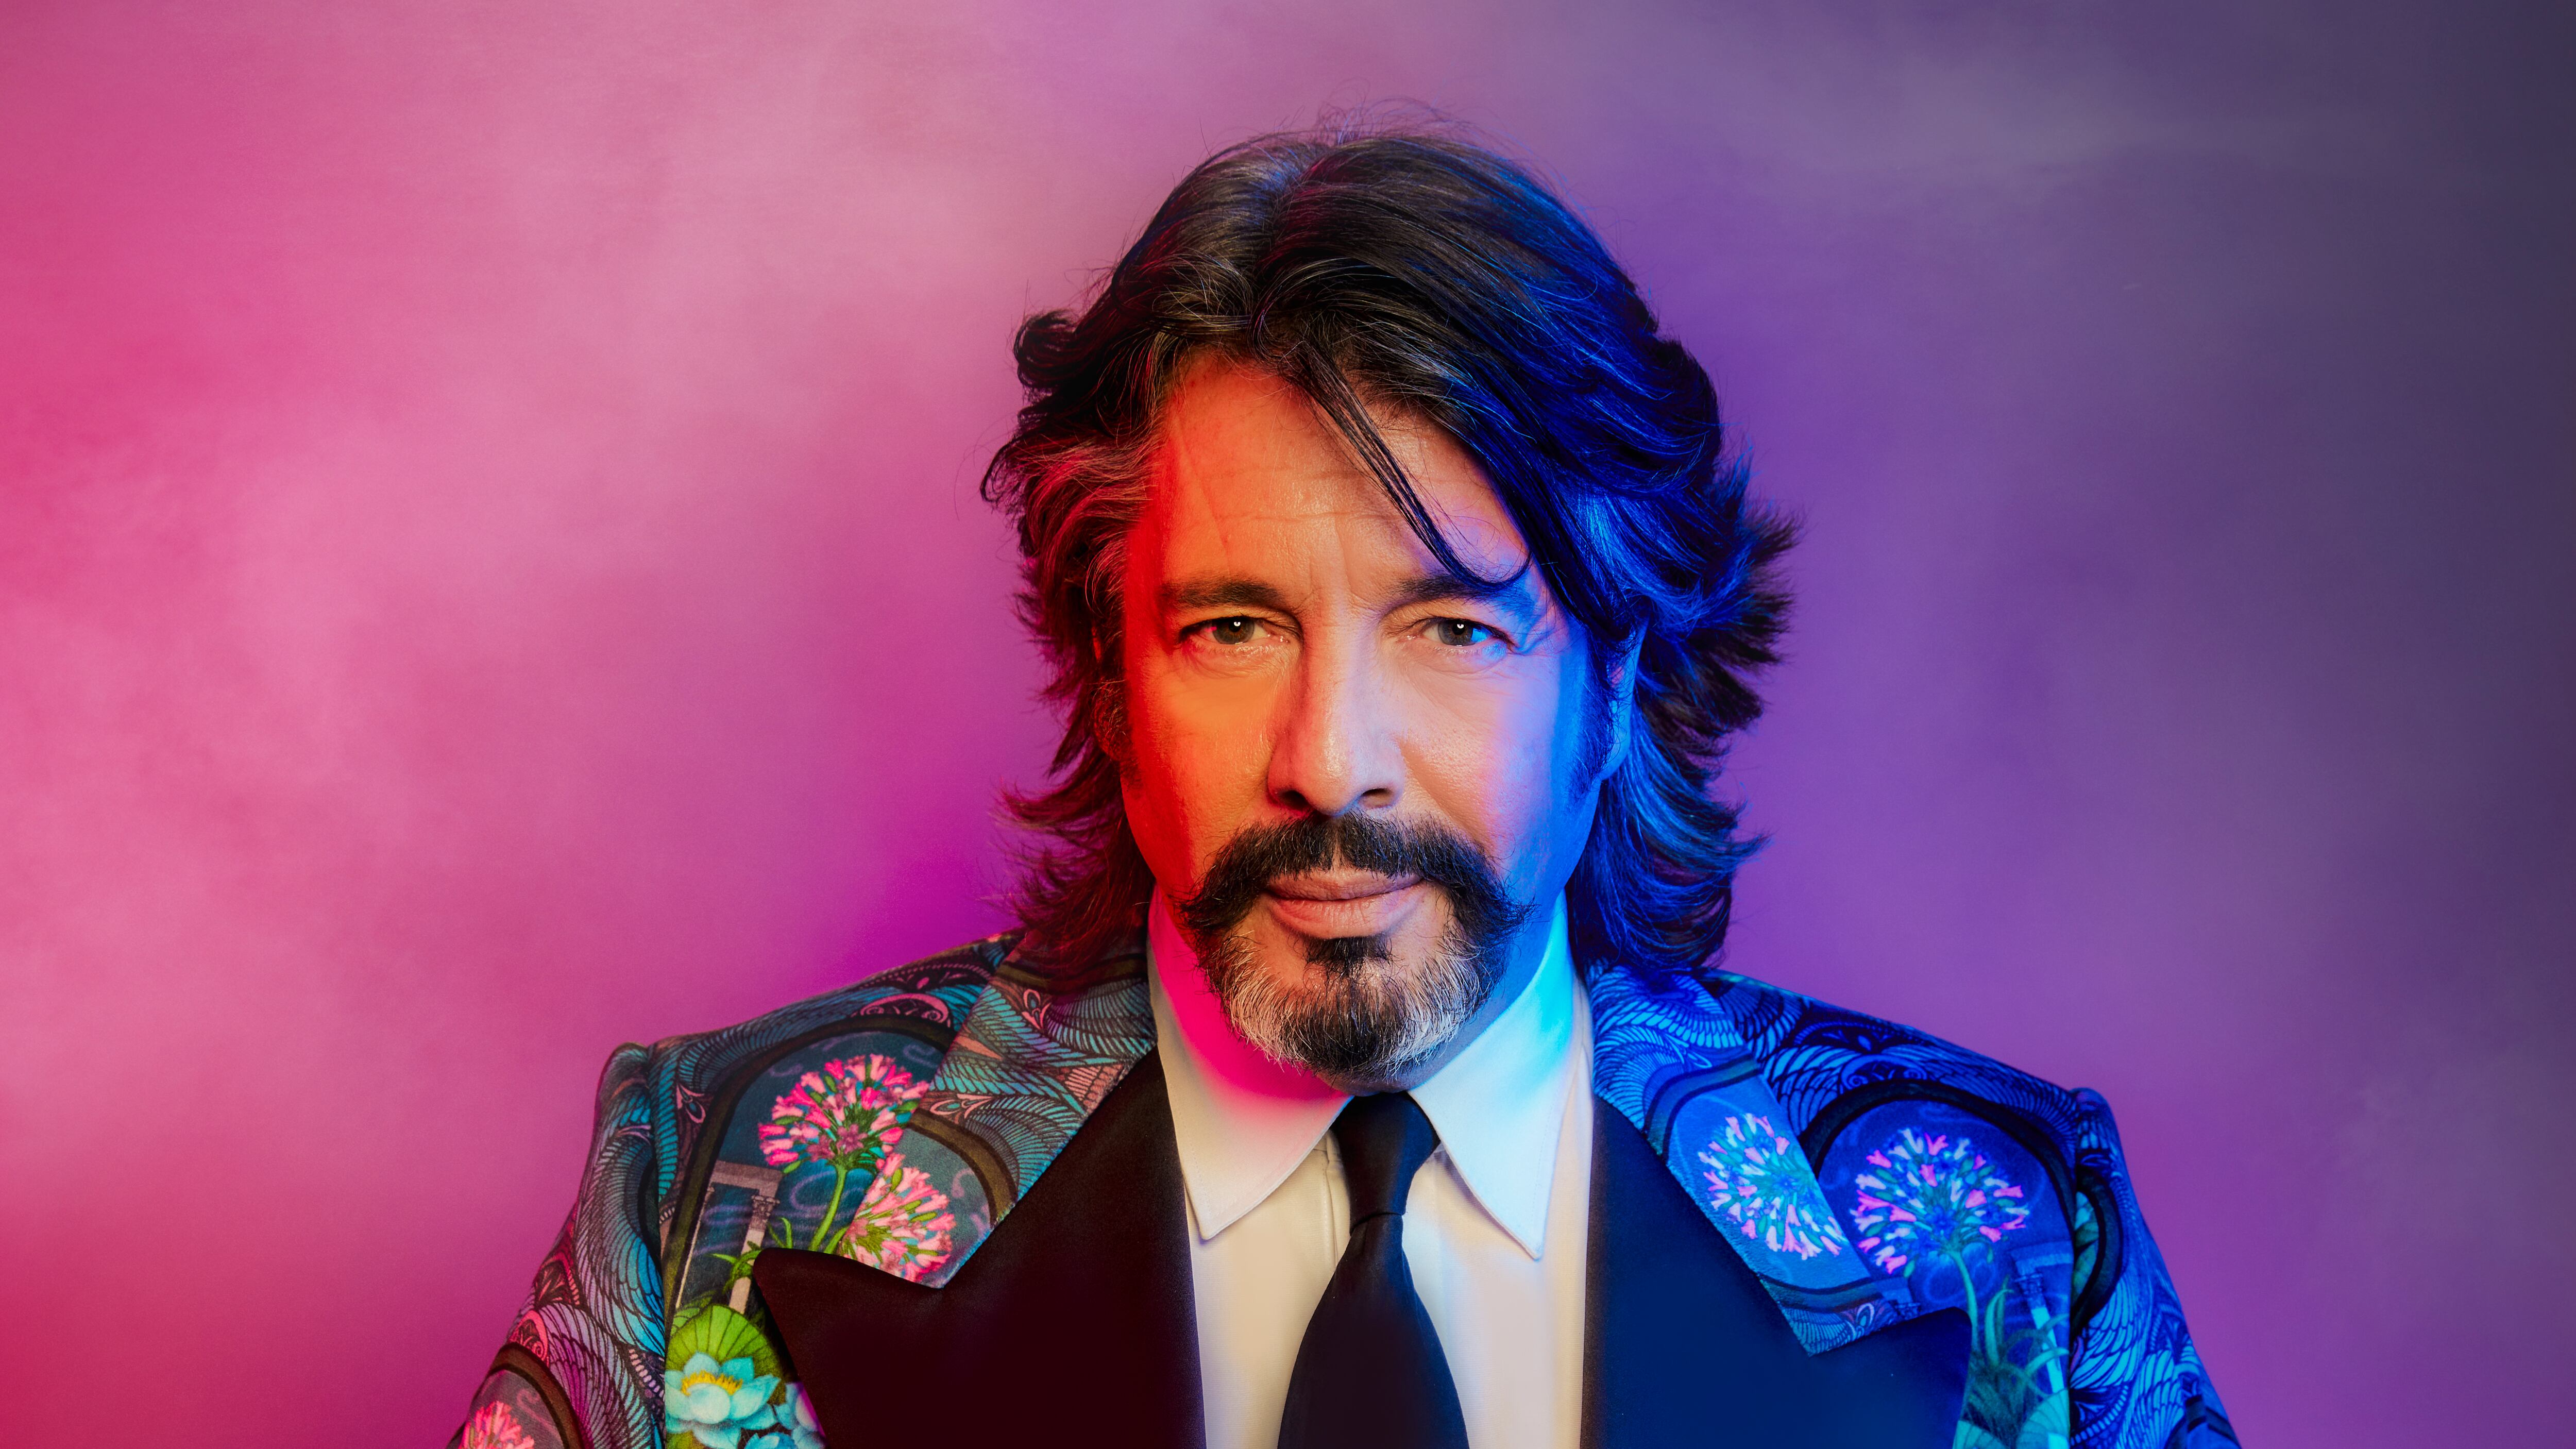 Colourful character: Laurence Llewelyn-Bowen